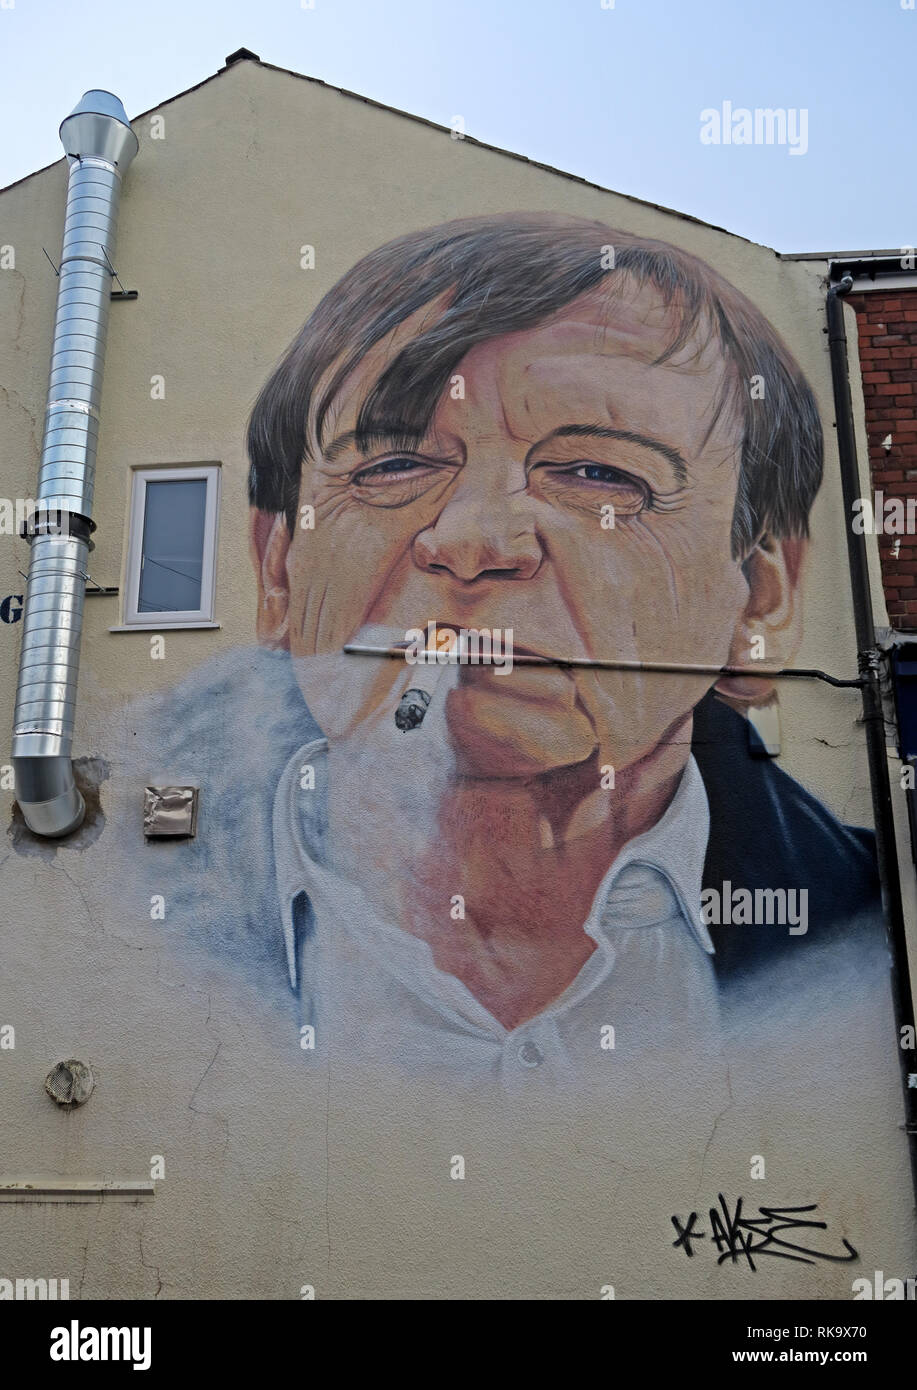 'Fear is something I try not to absorb',Clifton Road, Prestwich, The Fall, Mark E Smith artwork, 8 Clifton Road, Prestwich, Bury M25 3HQ, England Stock Photo